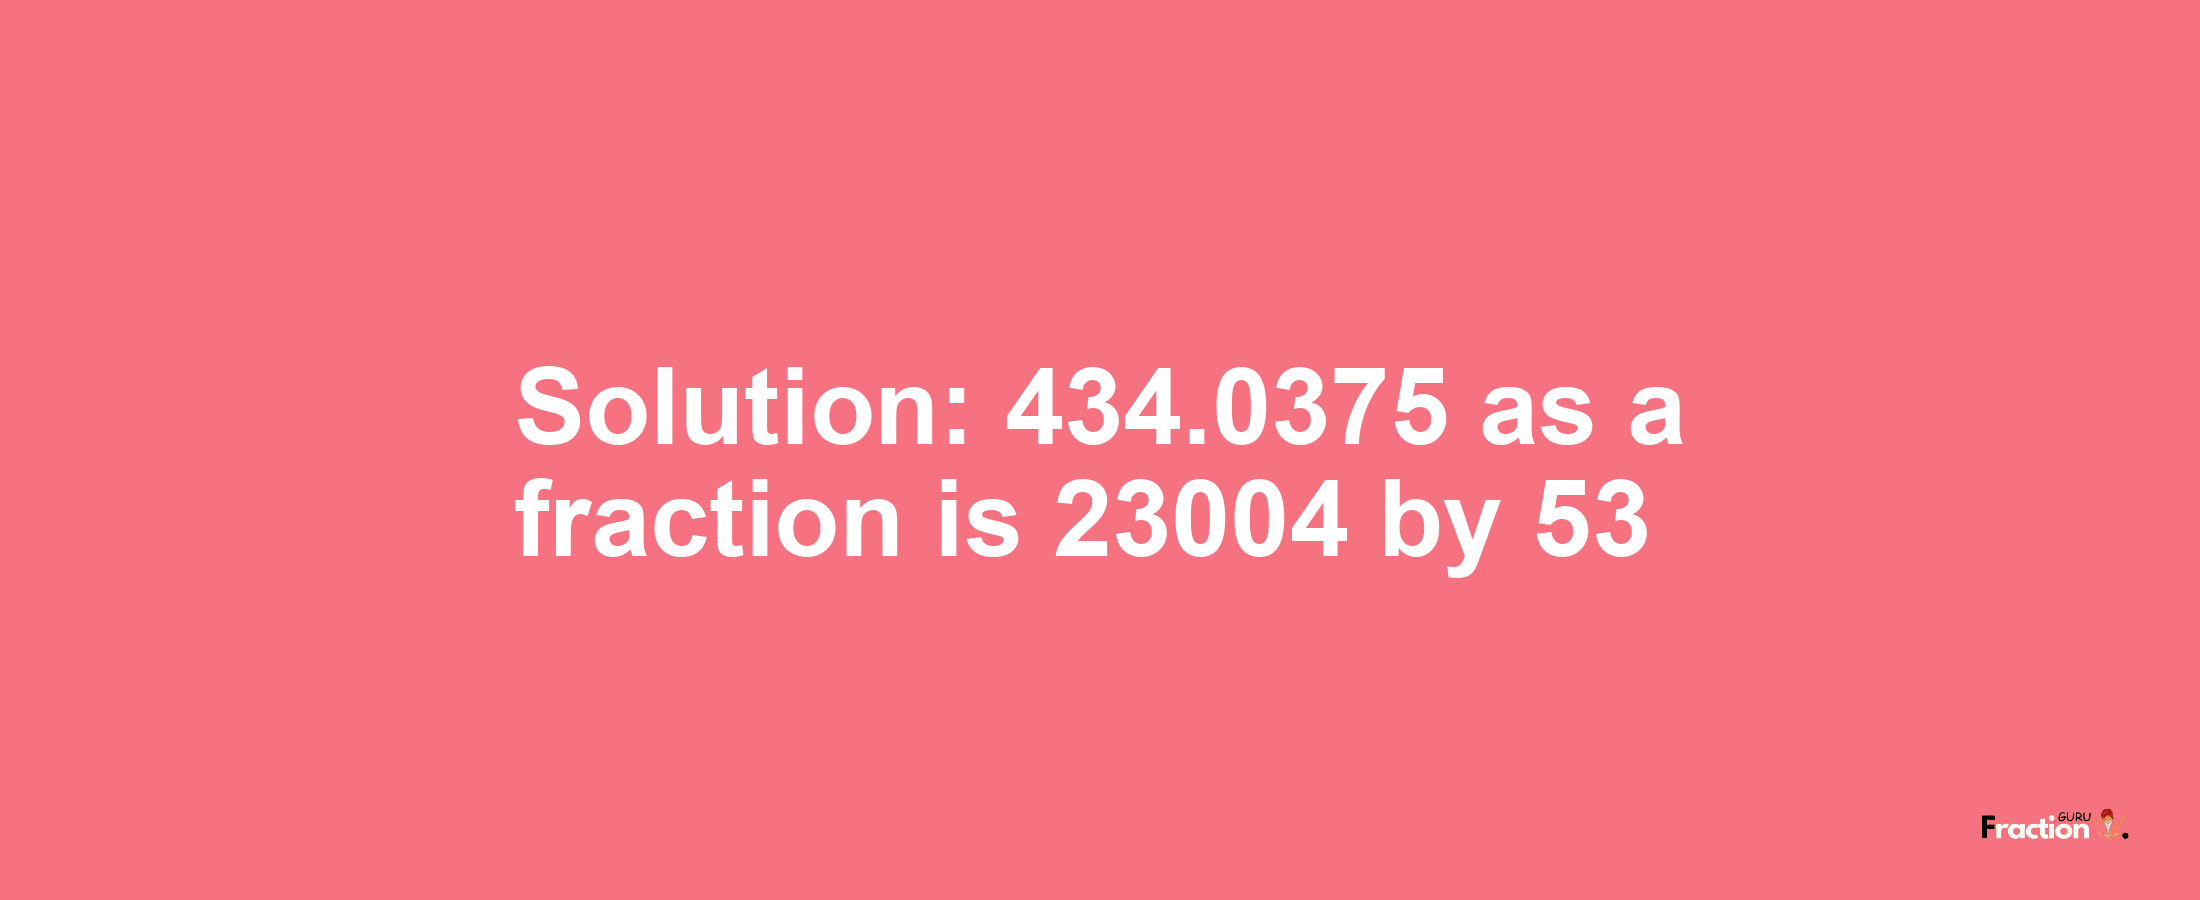 Solution:434.0375 as a fraction is 23004/53